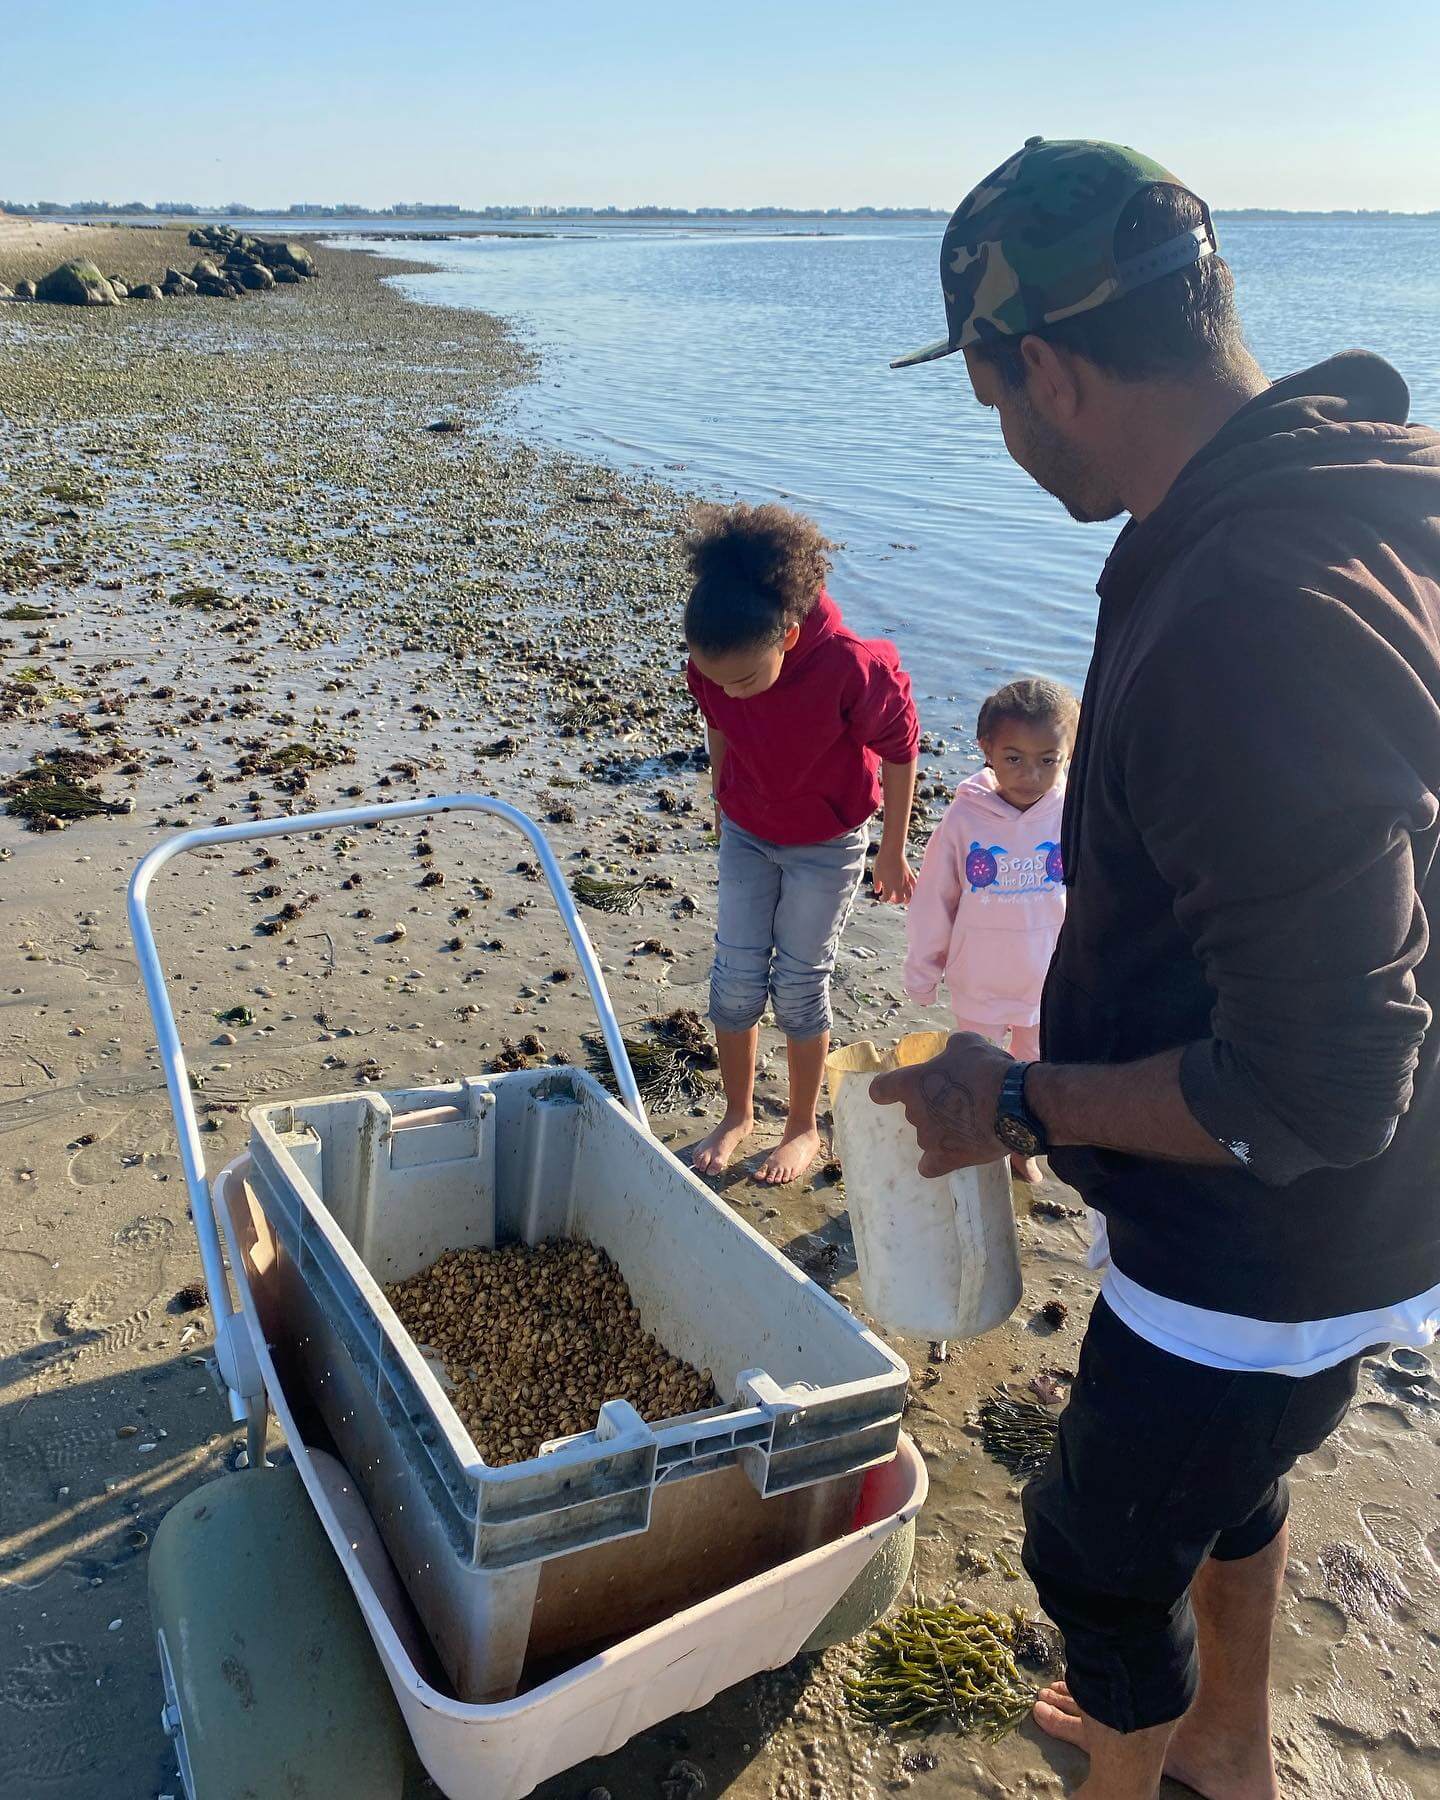 Hatchery worker Mila McKey seeding oysters in Shinnecock Bay with the help of youth from the Boys and Girls Club of Shinnecock